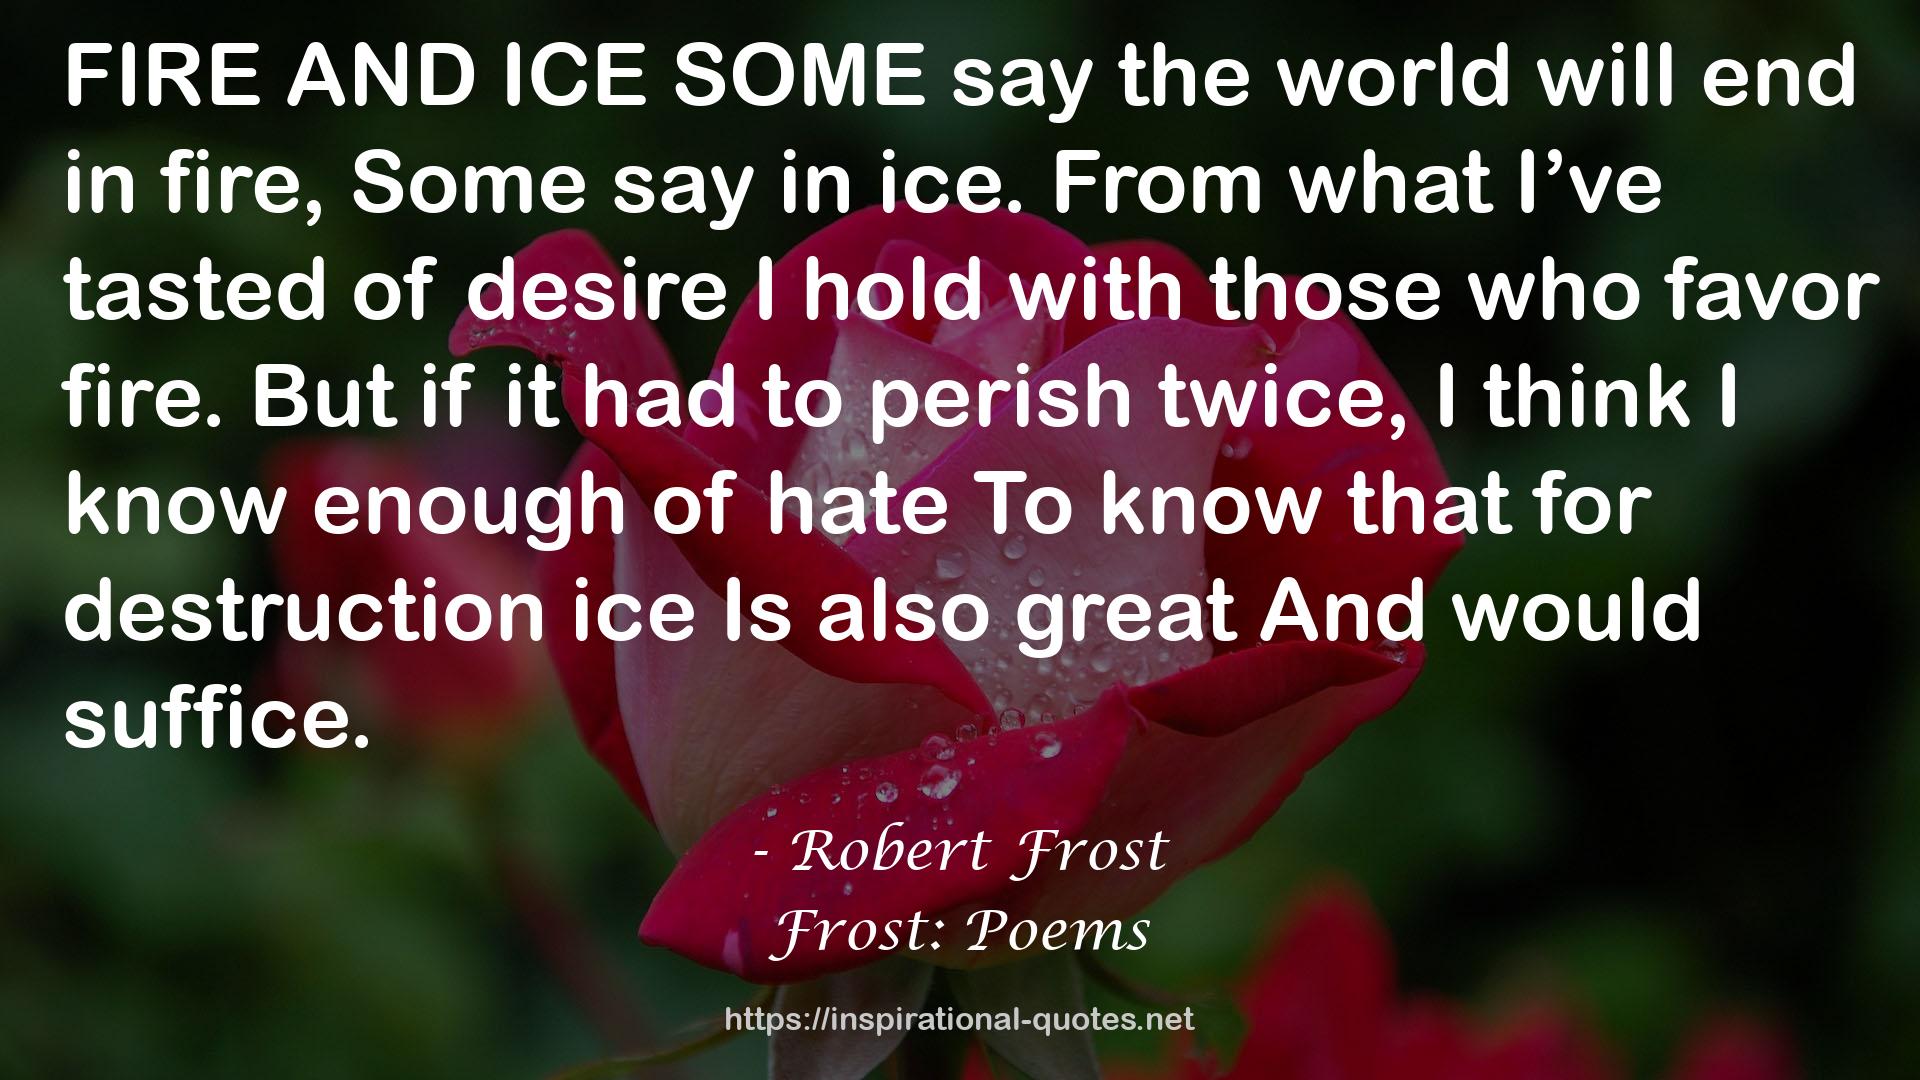 Frost: Poems QUOTES